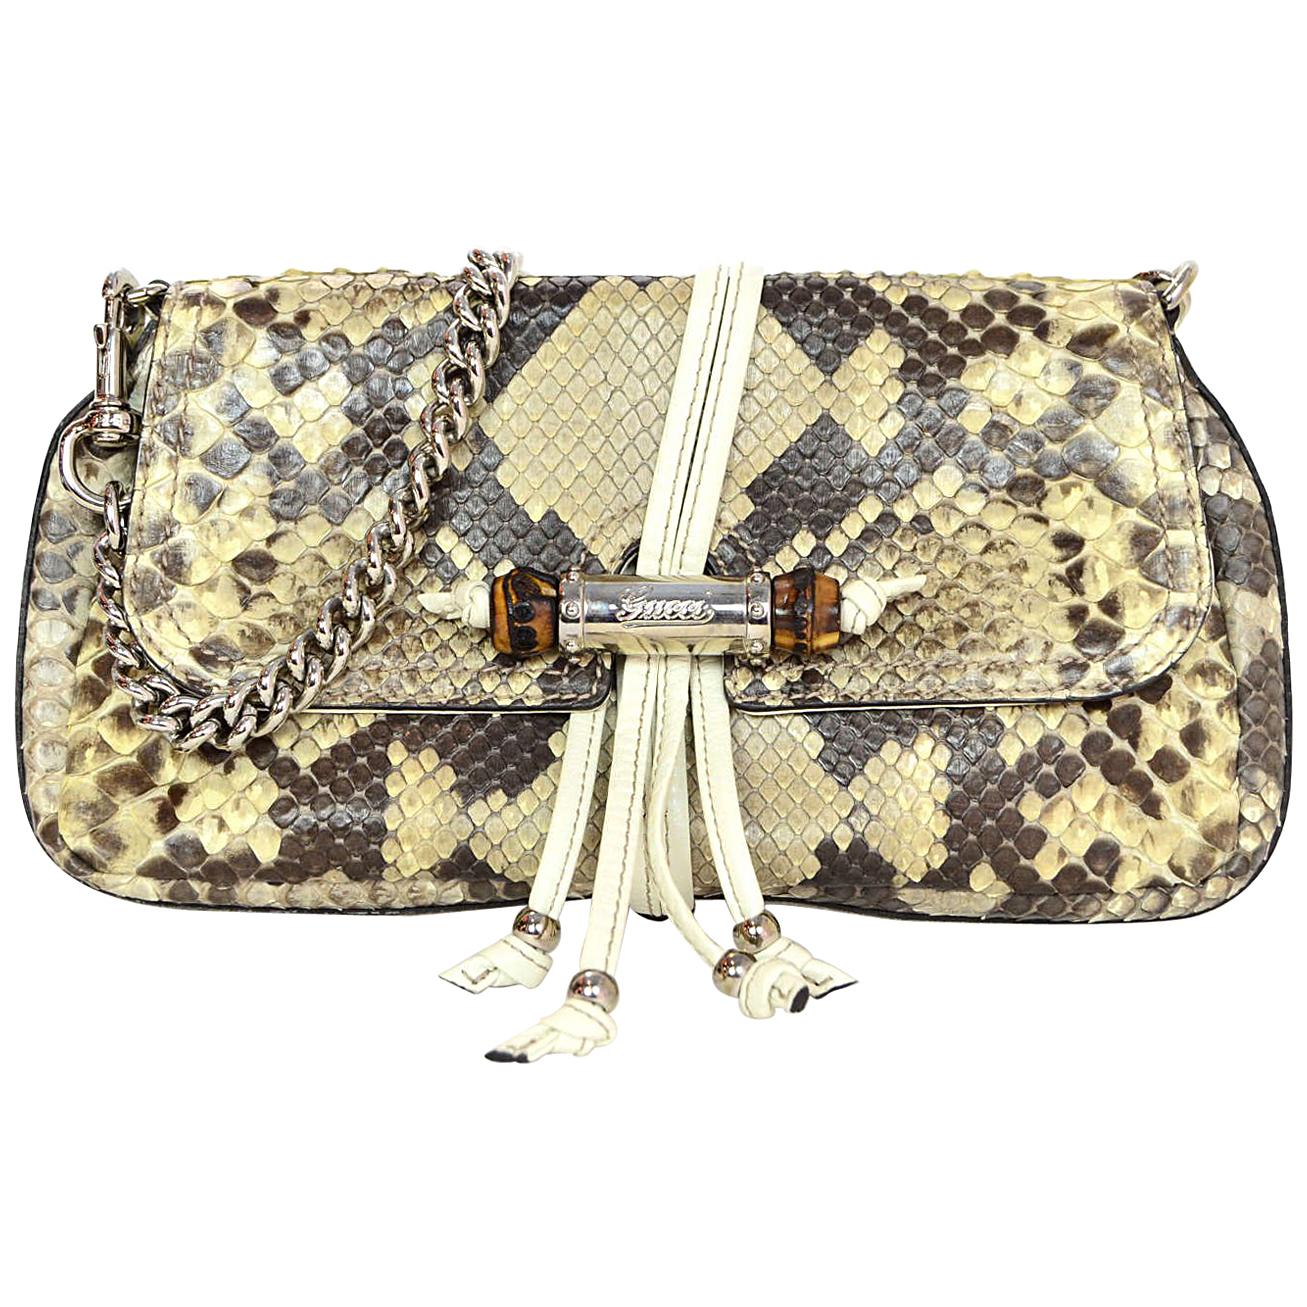 GUCCI Croisette Bamboo Evening Python Leather Shoulder Bag Off White 2